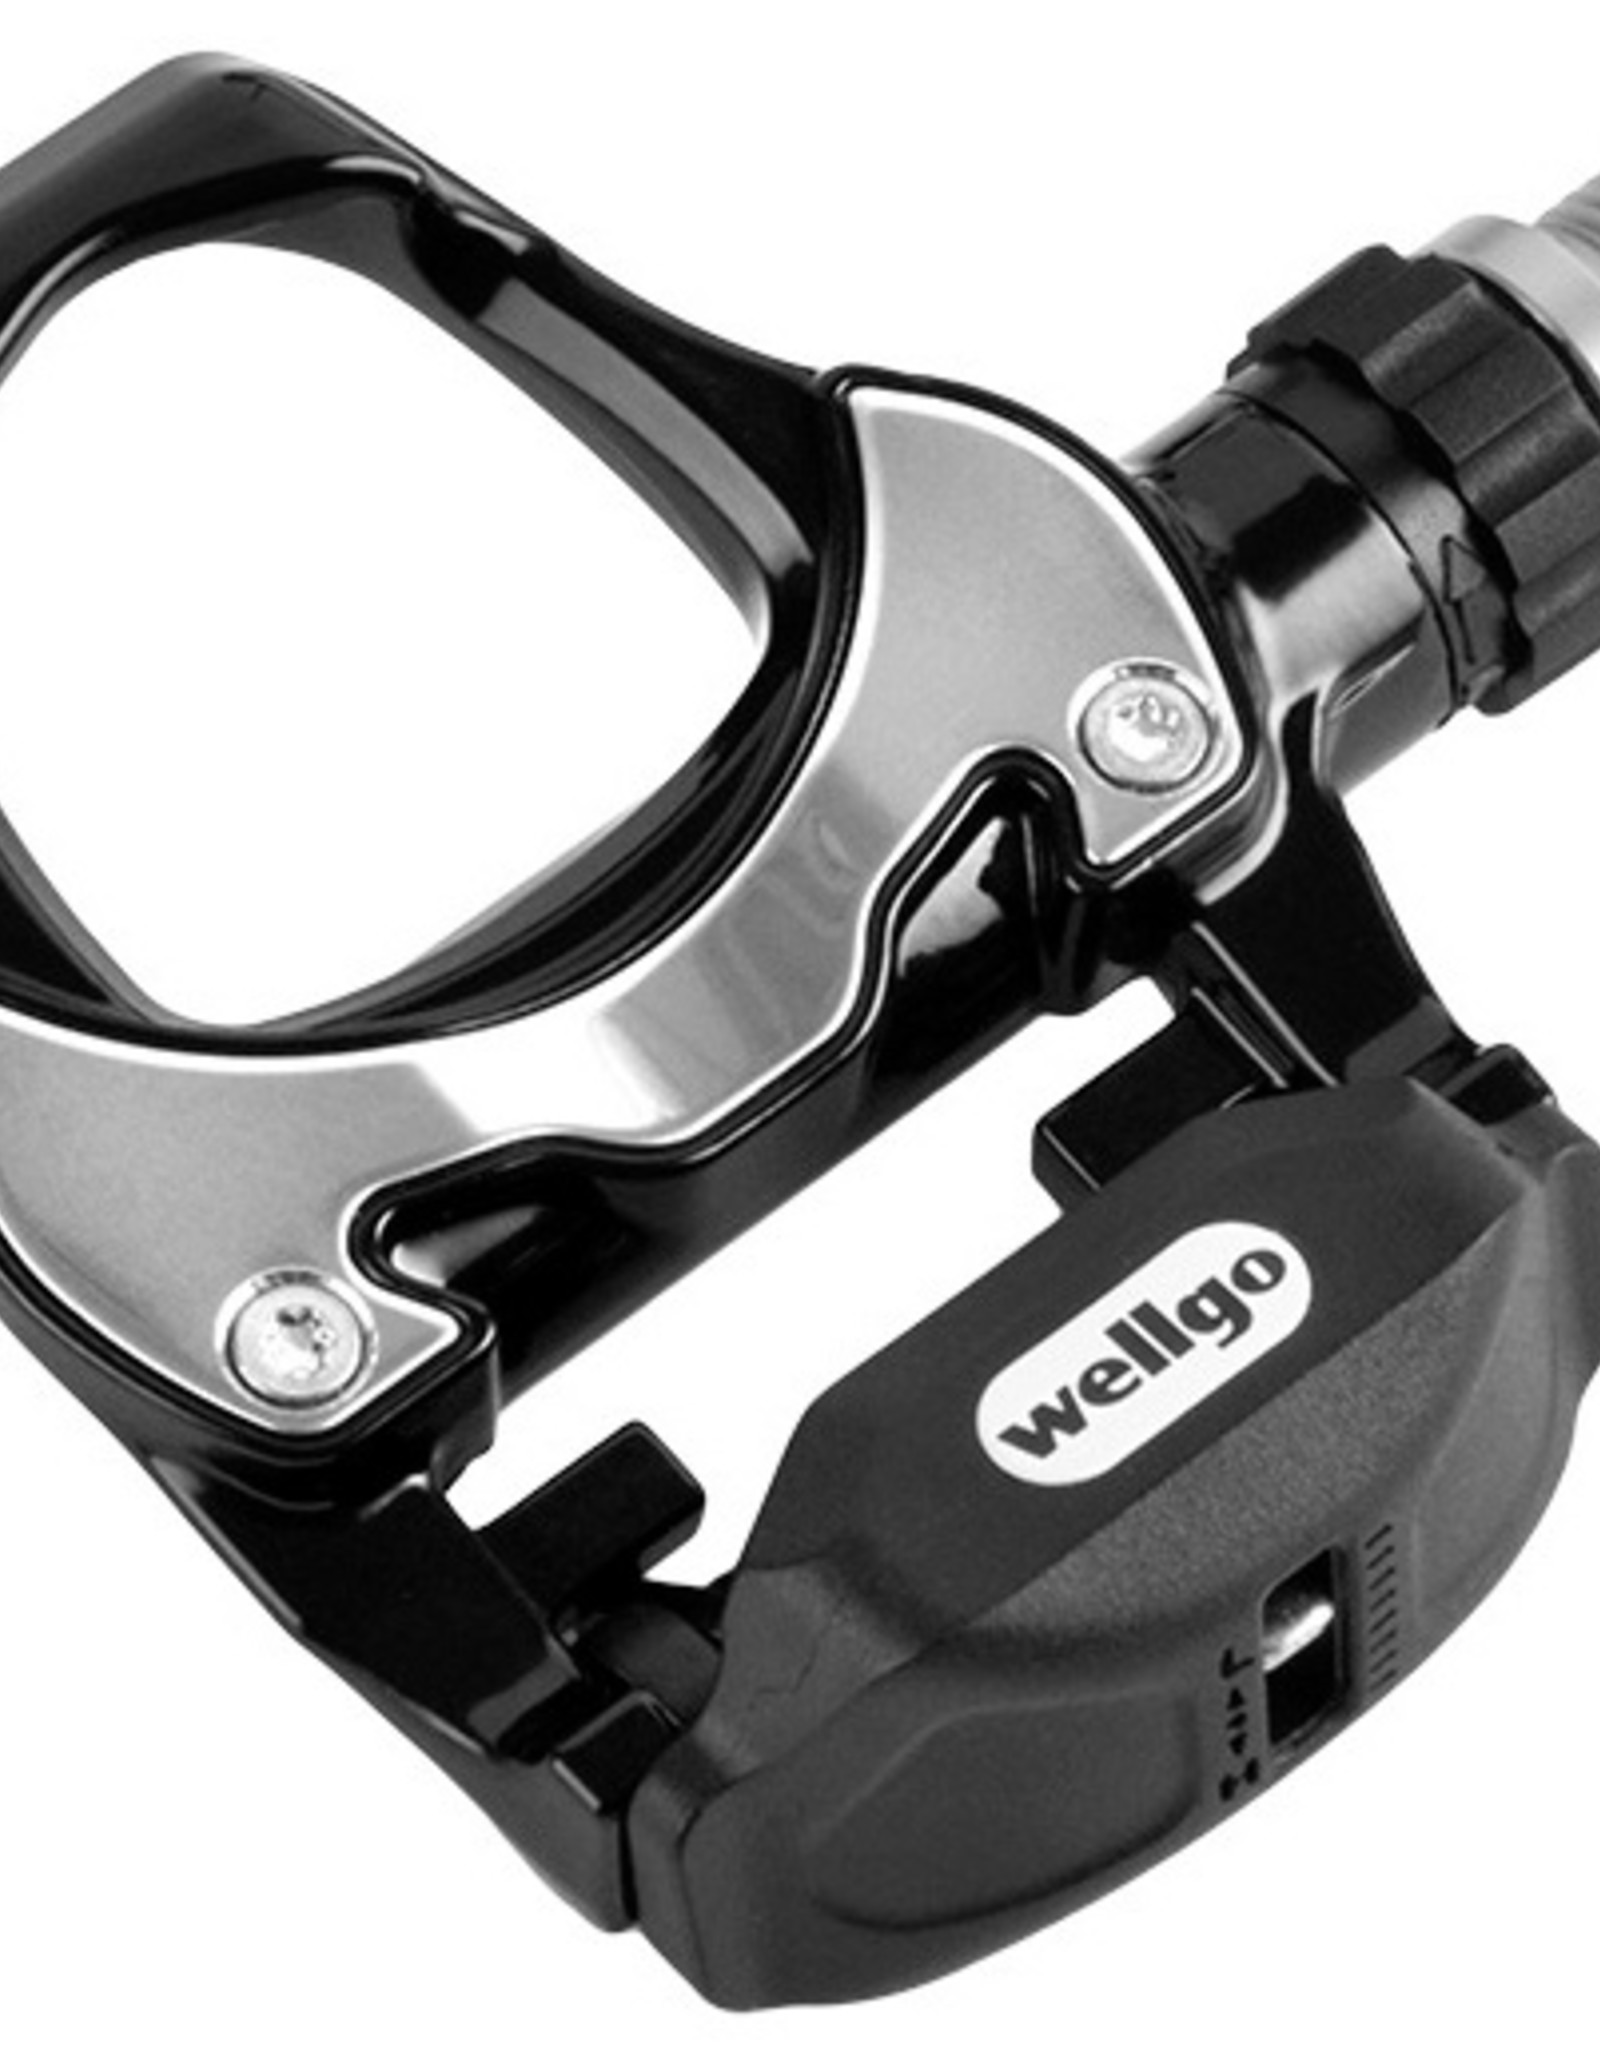 Wellgo 2DU Bearing - R251 Road Clipless 9/16" Pedal in Black